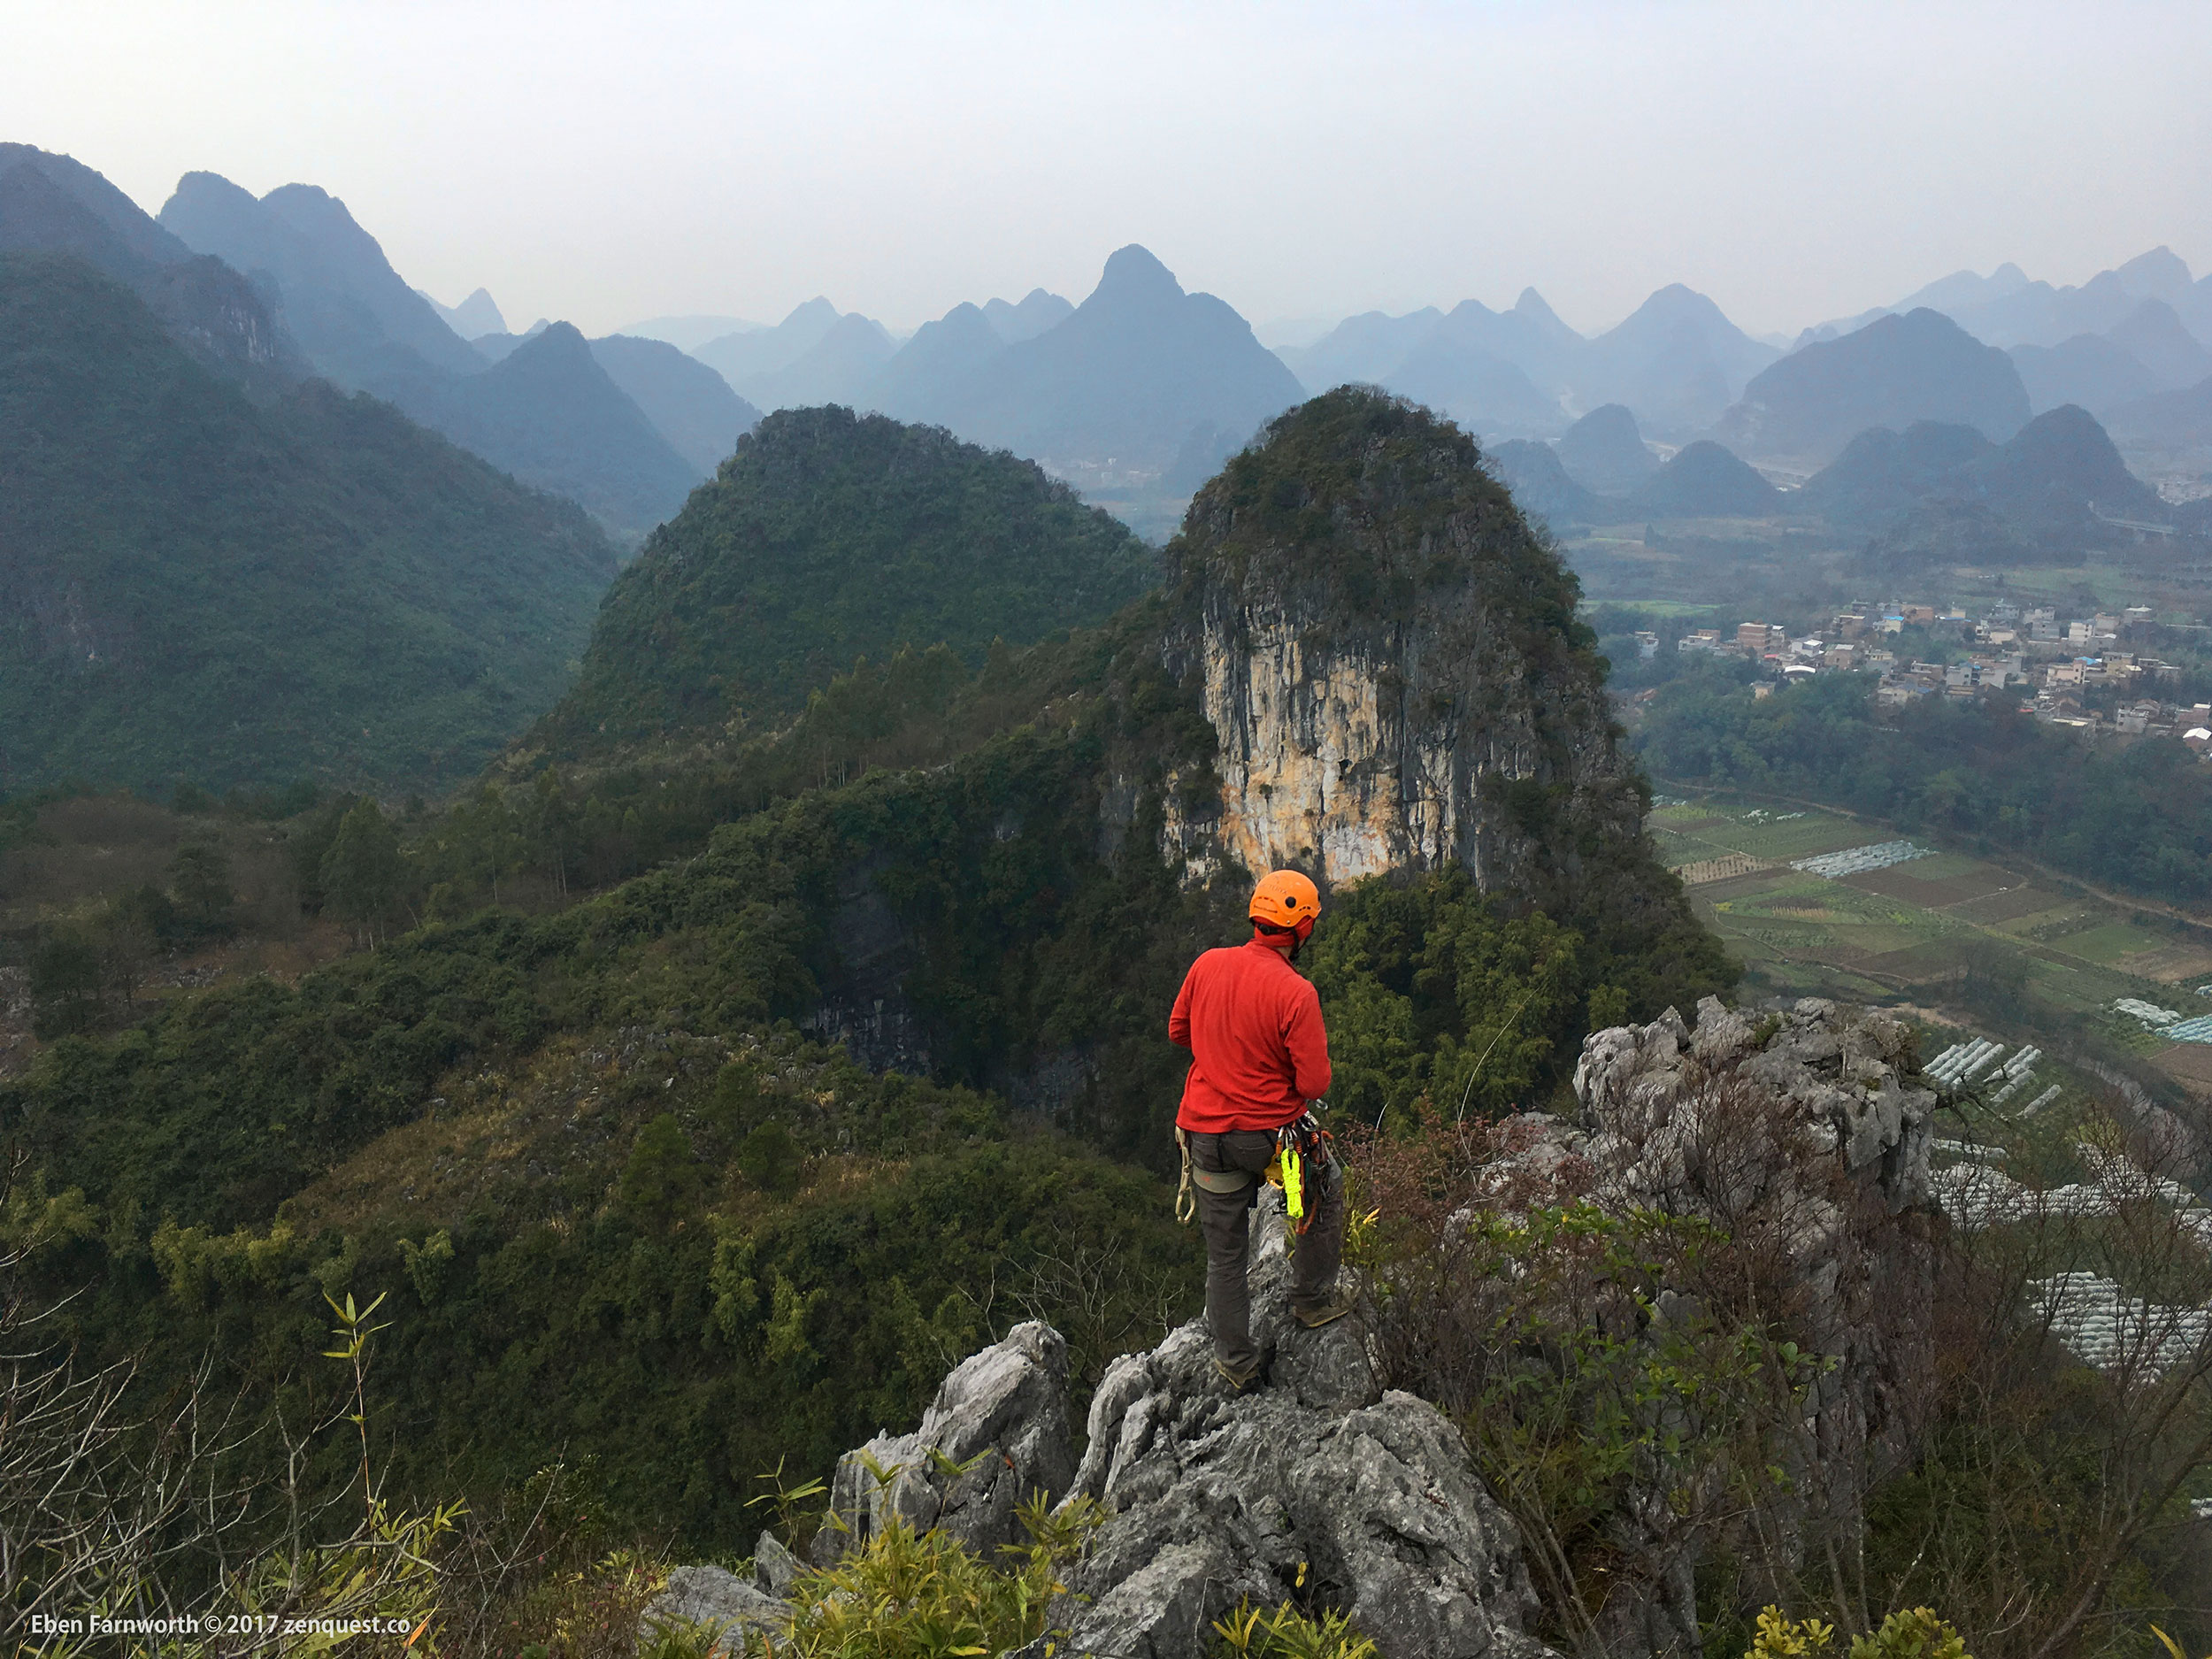 Looking out at the rolling karst landscape of Guangxi China from on top of the mountain.